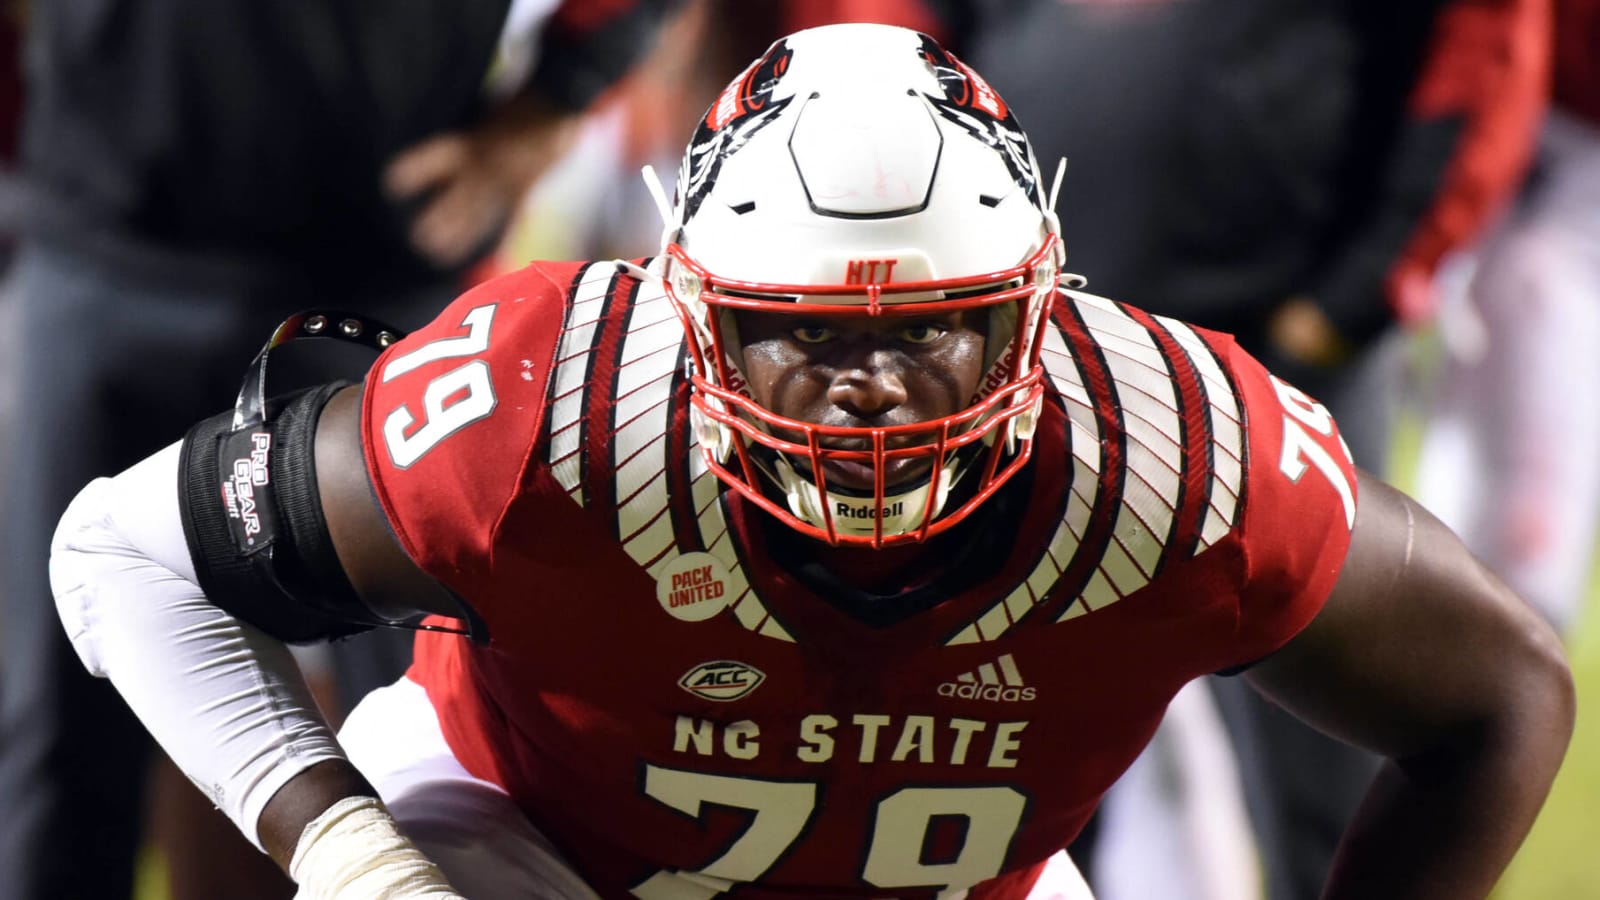 Jets targeting offensive line with fourth pick?